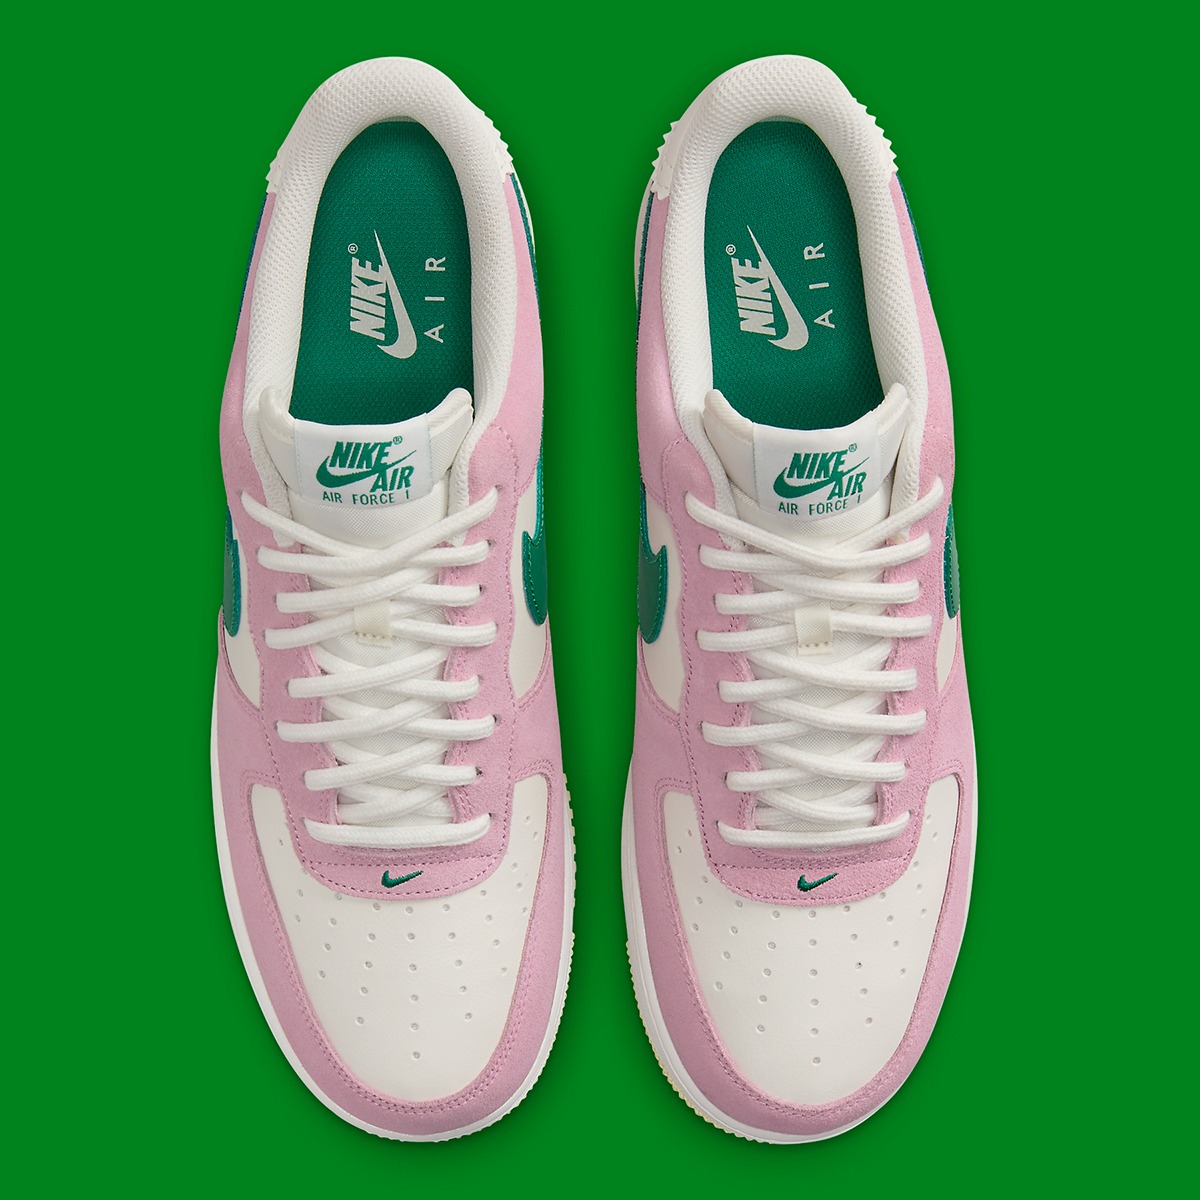 Nike eggs nike eggs roshe run mens with red spits on legs back Low Sail Malachite Soft Pink Alabaster Fv9346 100 5